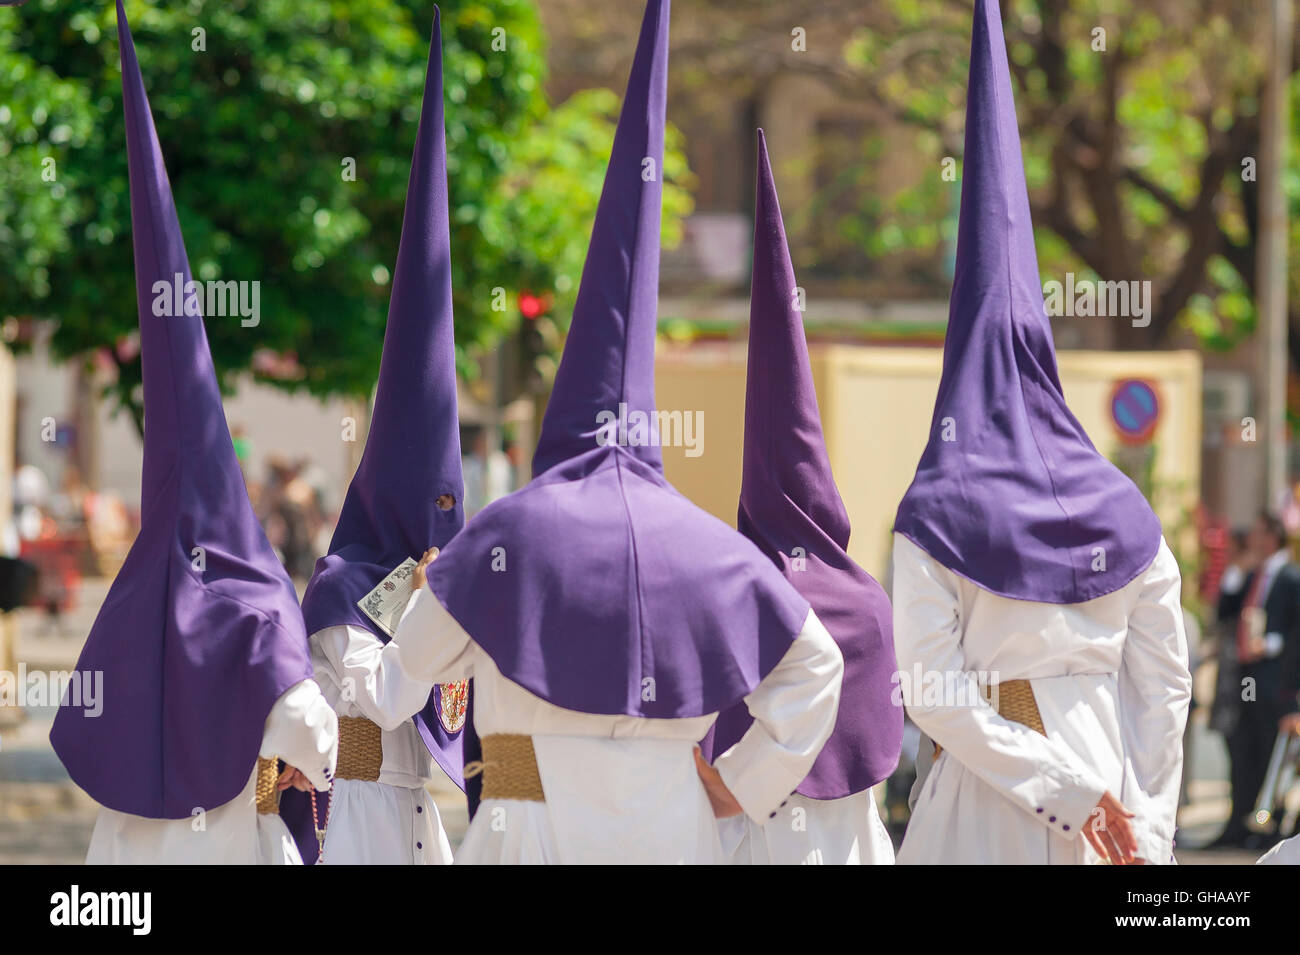 Seville Spain Holy Week, members of a hooded cofradia (brotherhood) gather before a procession in the Semana Santa festival in Seville, Spain. Stock Photo